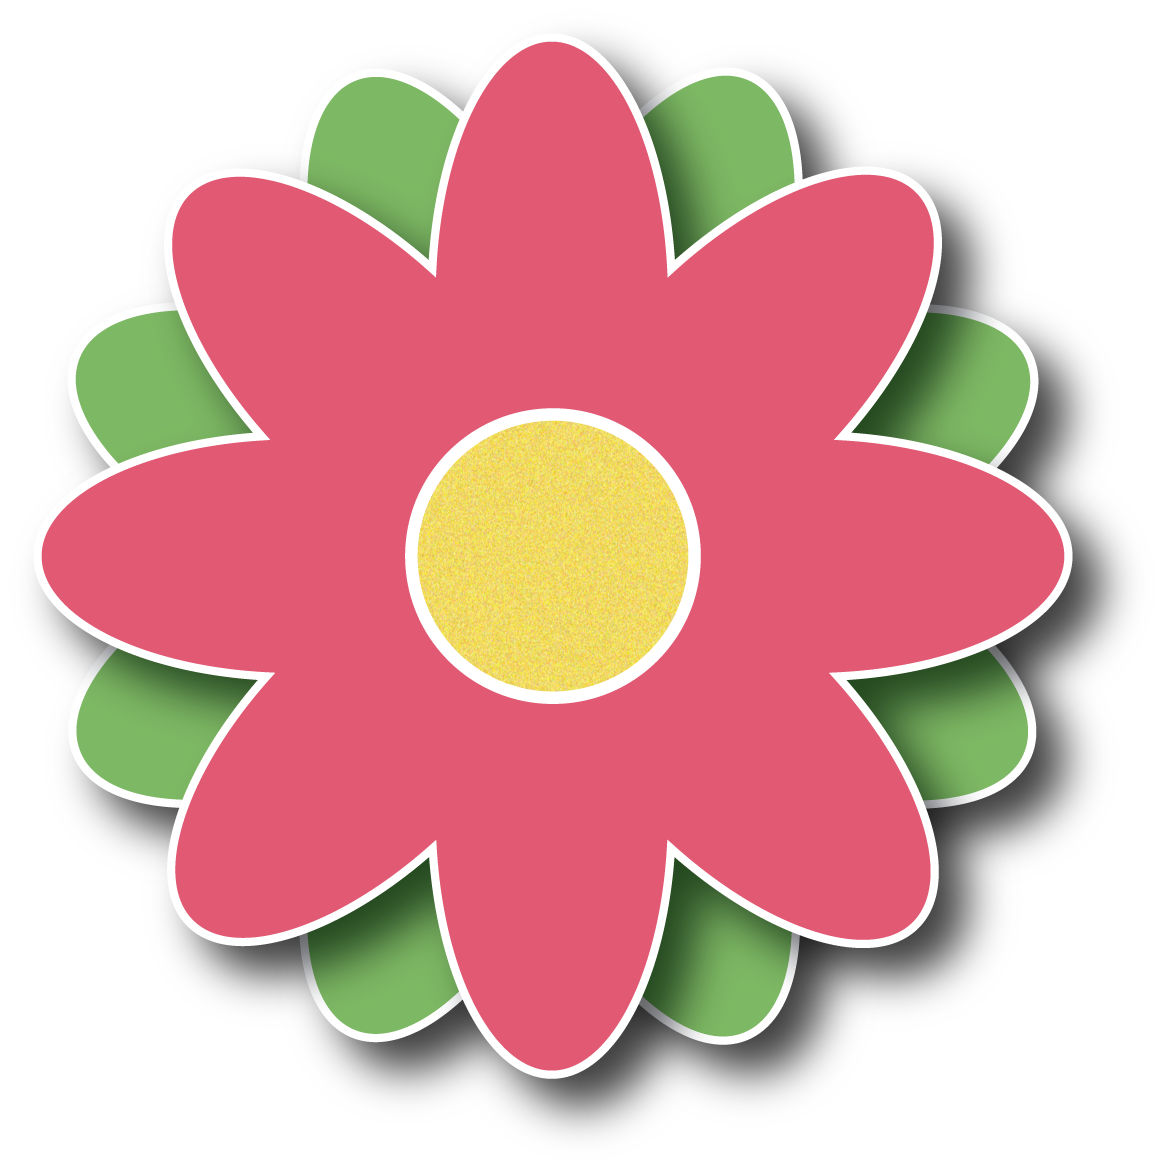 Free Spring Flower Clipart | Free Download Clip Art | Free Clip ...